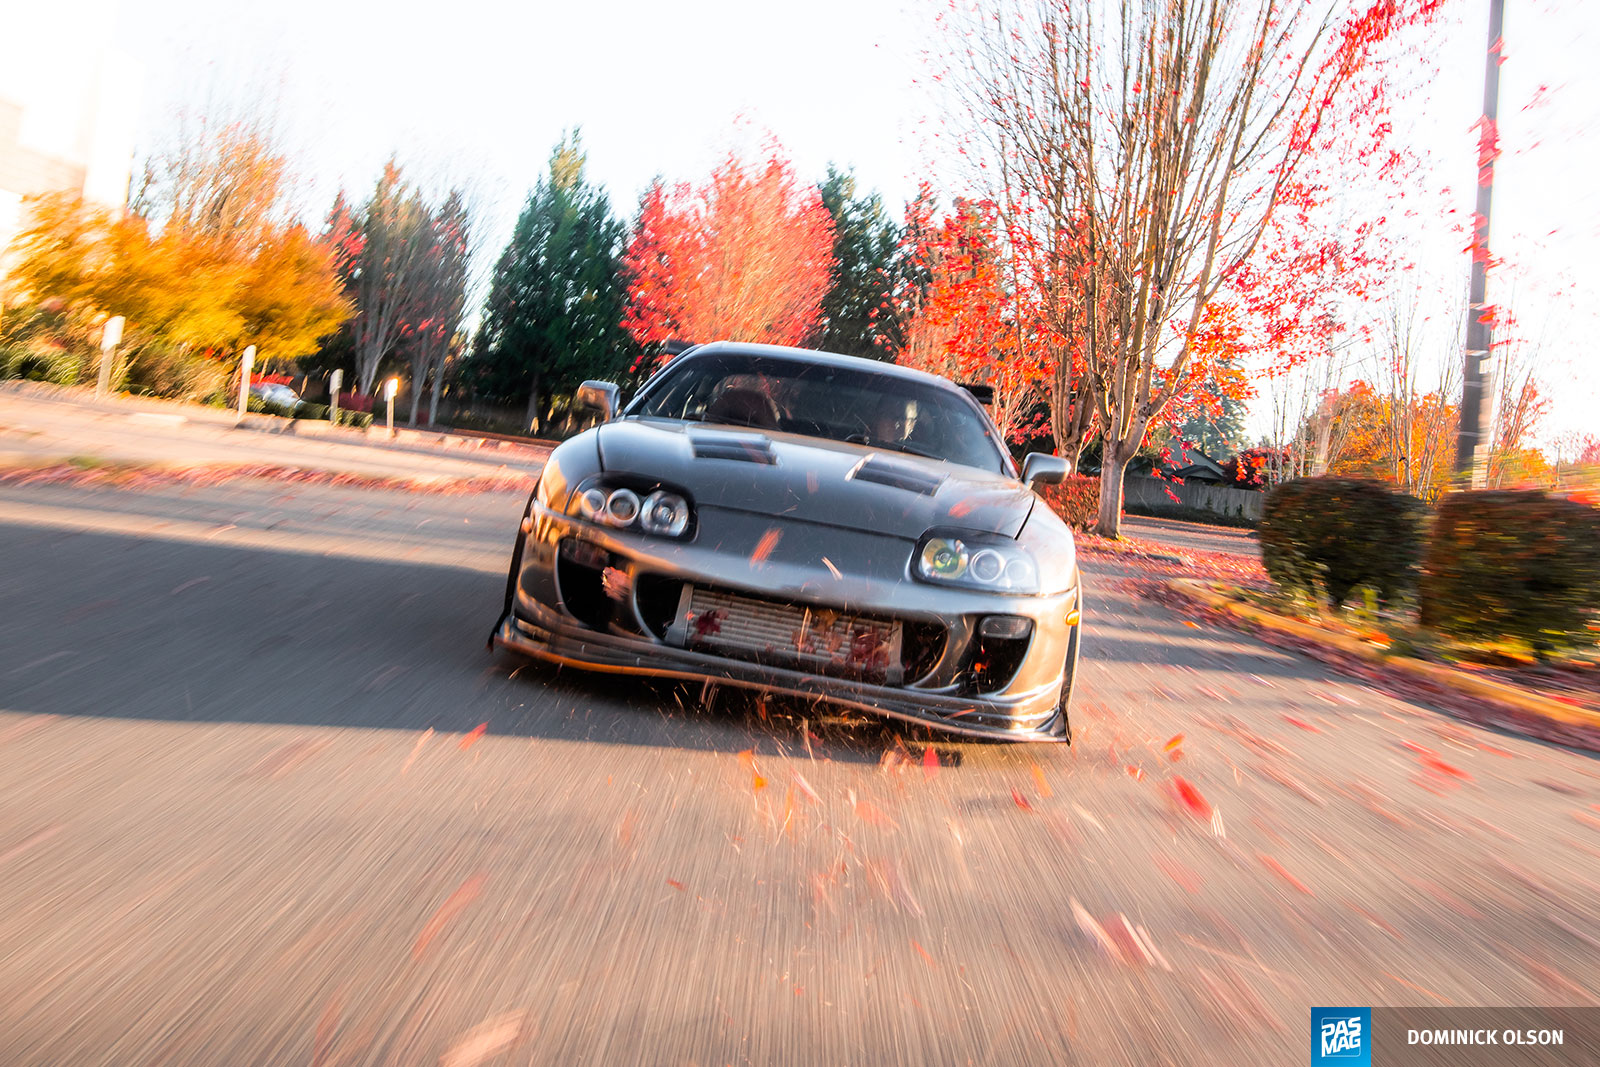 07 Shay Bisconer 1995 Toyota Supra PASMAG Builds To Follow